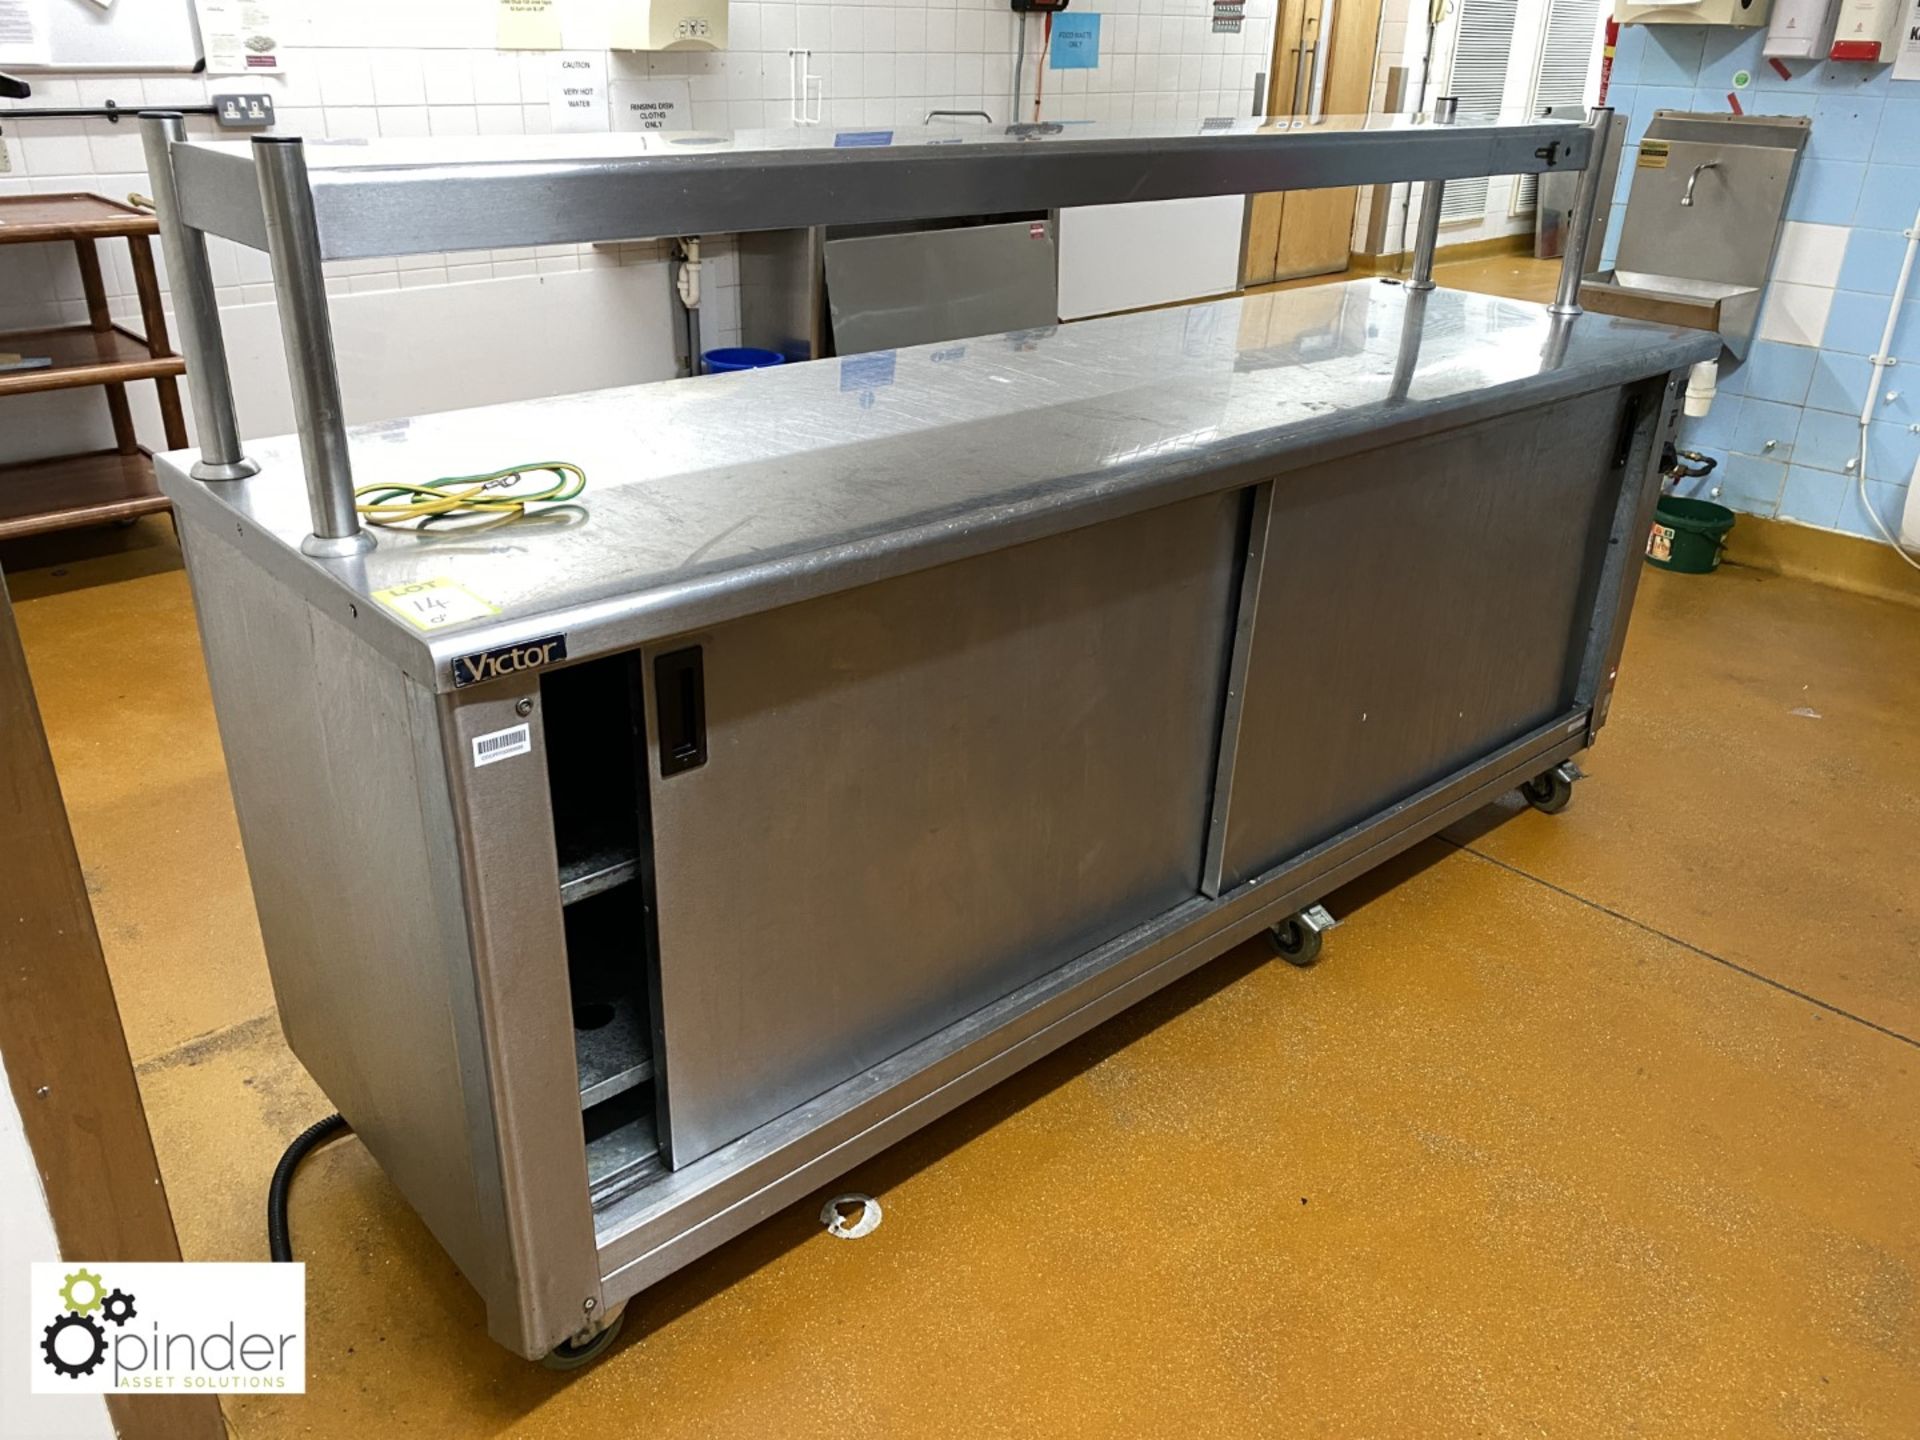 Victor stainless steel Heated Servery, 2300mm x 700mm, with heated gantry, 415volts (located in Main - Image 2 of 2